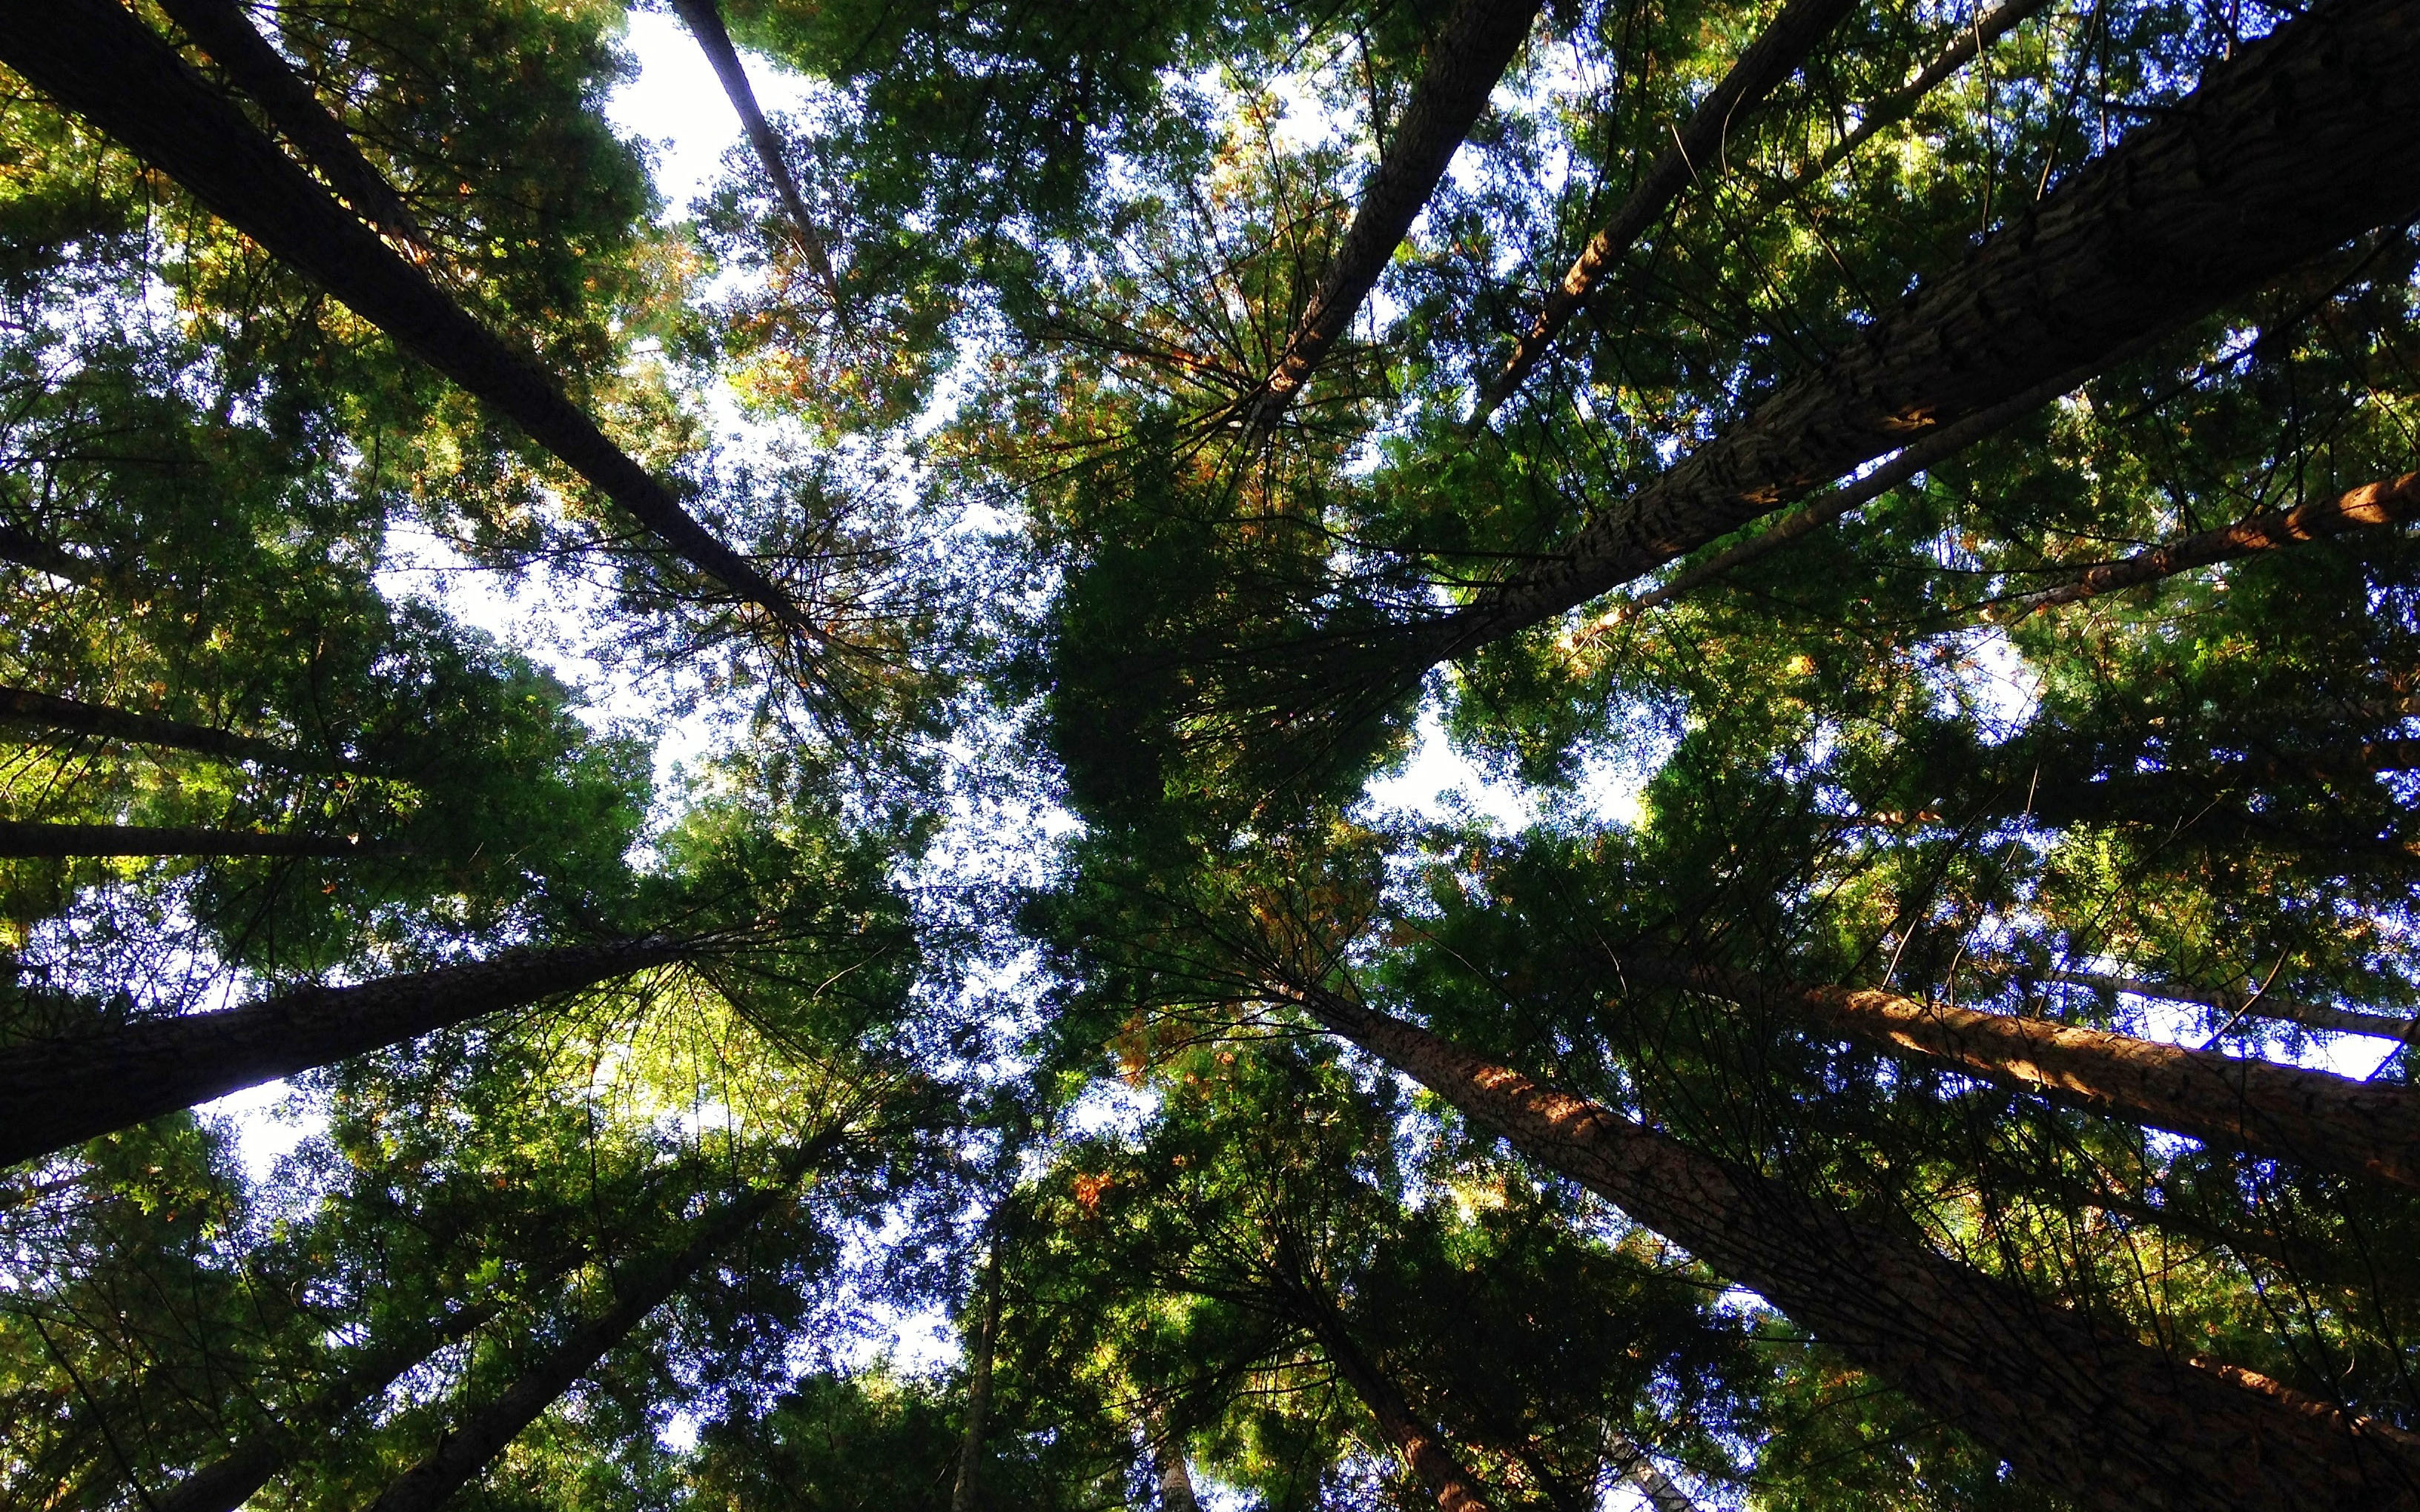 Treetops seen from the ground